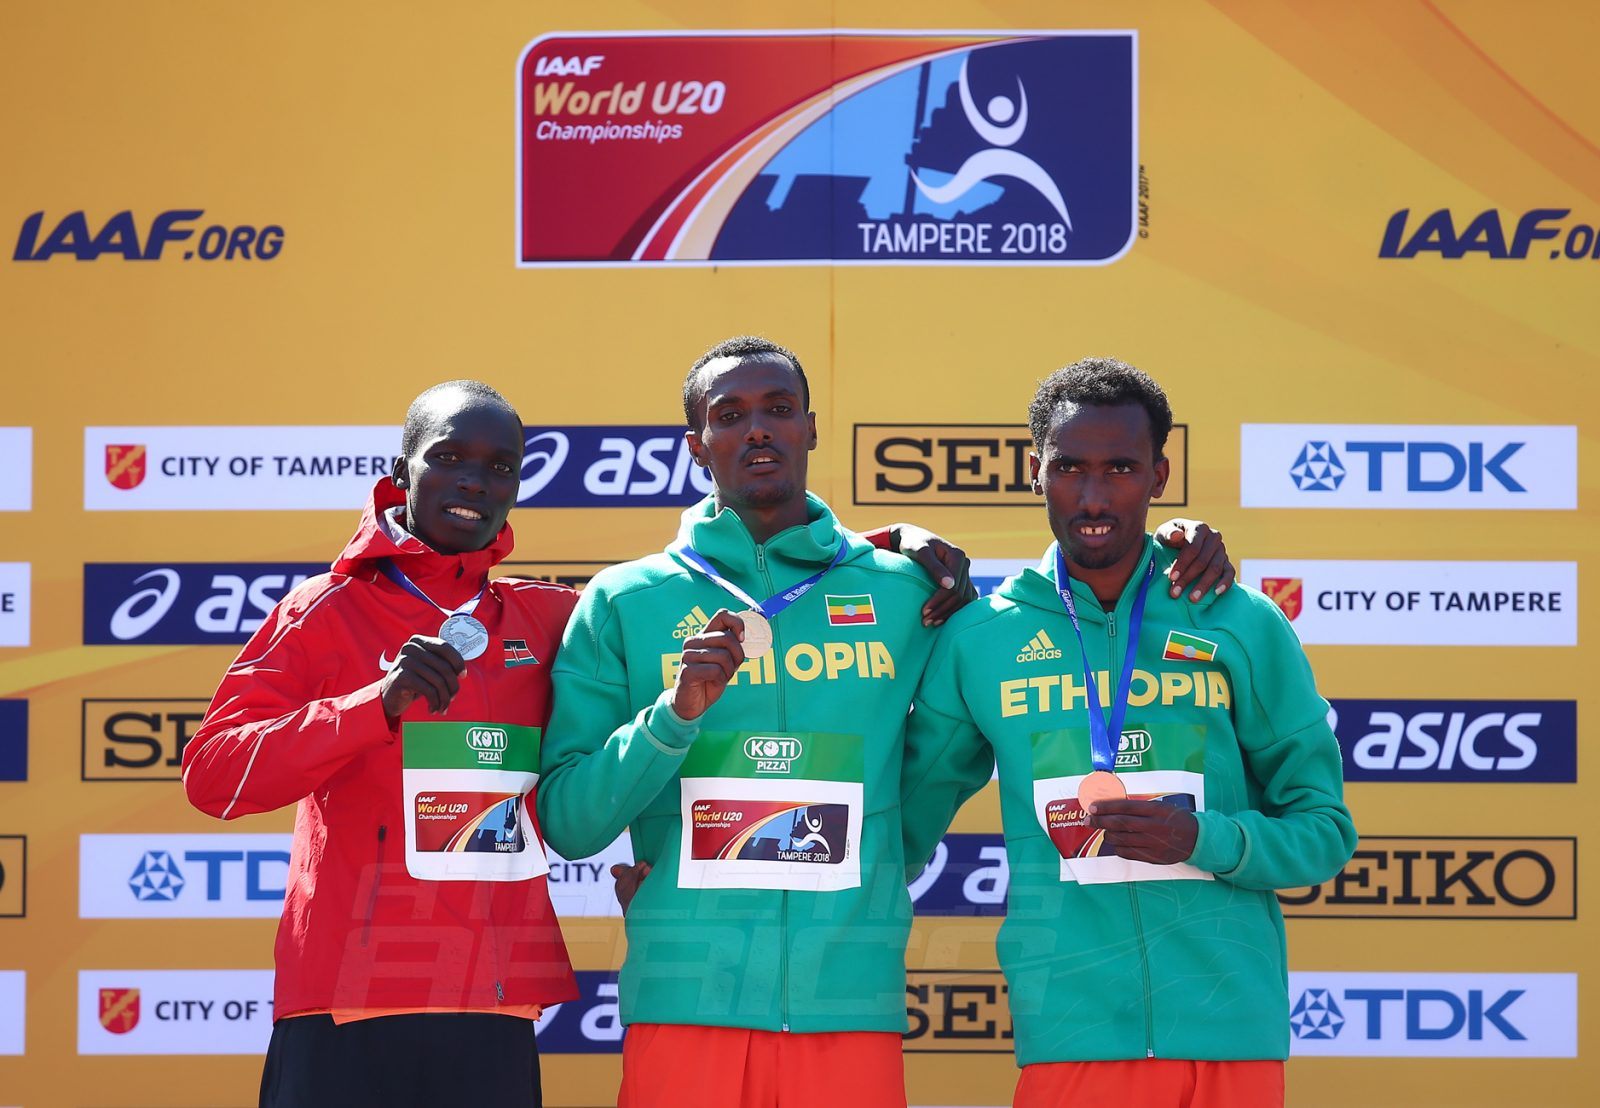 Takele Nigate (GOLD), Leonard Kipkemoi Bett (Silver), and Getnet Wale (Bronze) on the podium during the men's 3000m steeplechase medal presentation at the IAAF World U20 Championships Tampere 2018 / Photo Credit: Getty Images for IAAF